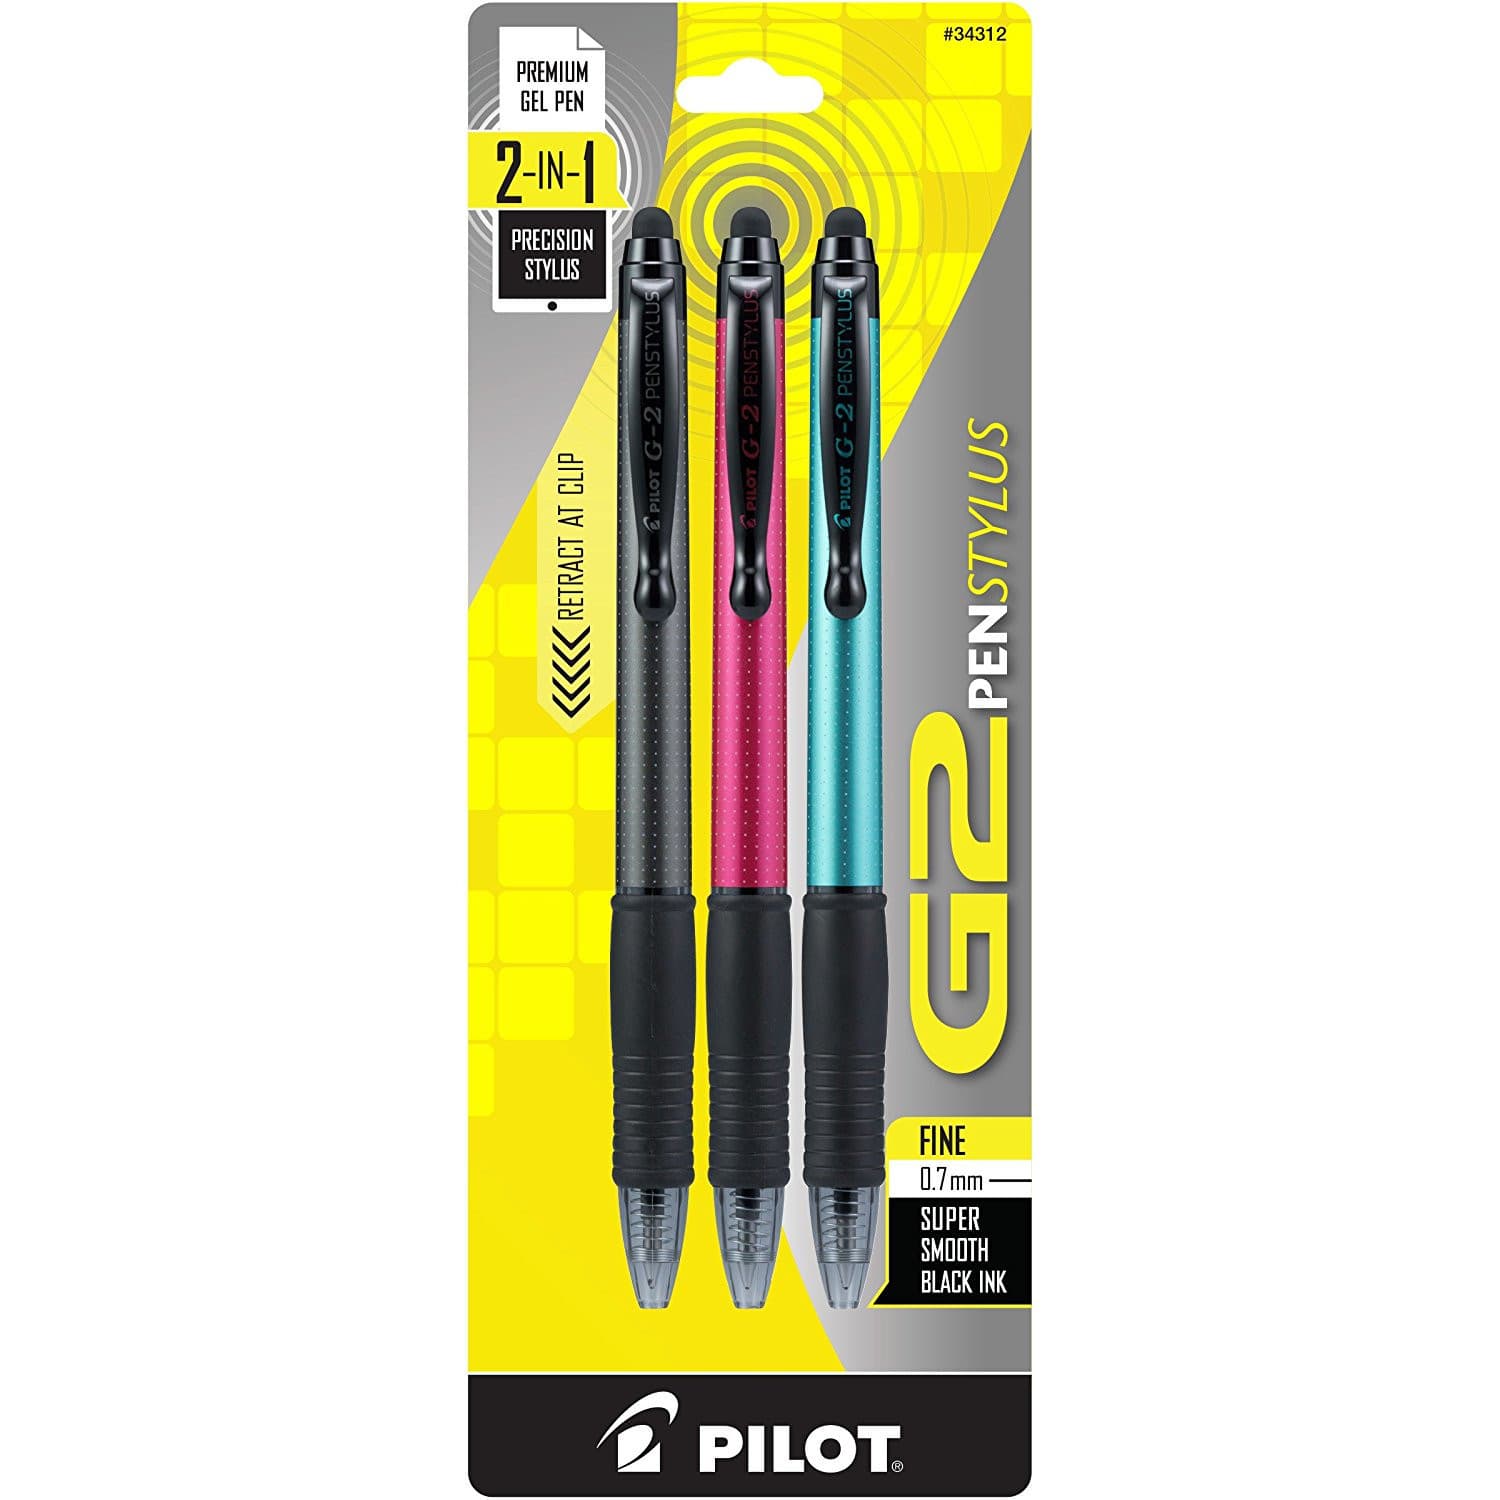 Pilot G2 Pen Stylus in Assorted Colors - Fine Point - Pack of 3